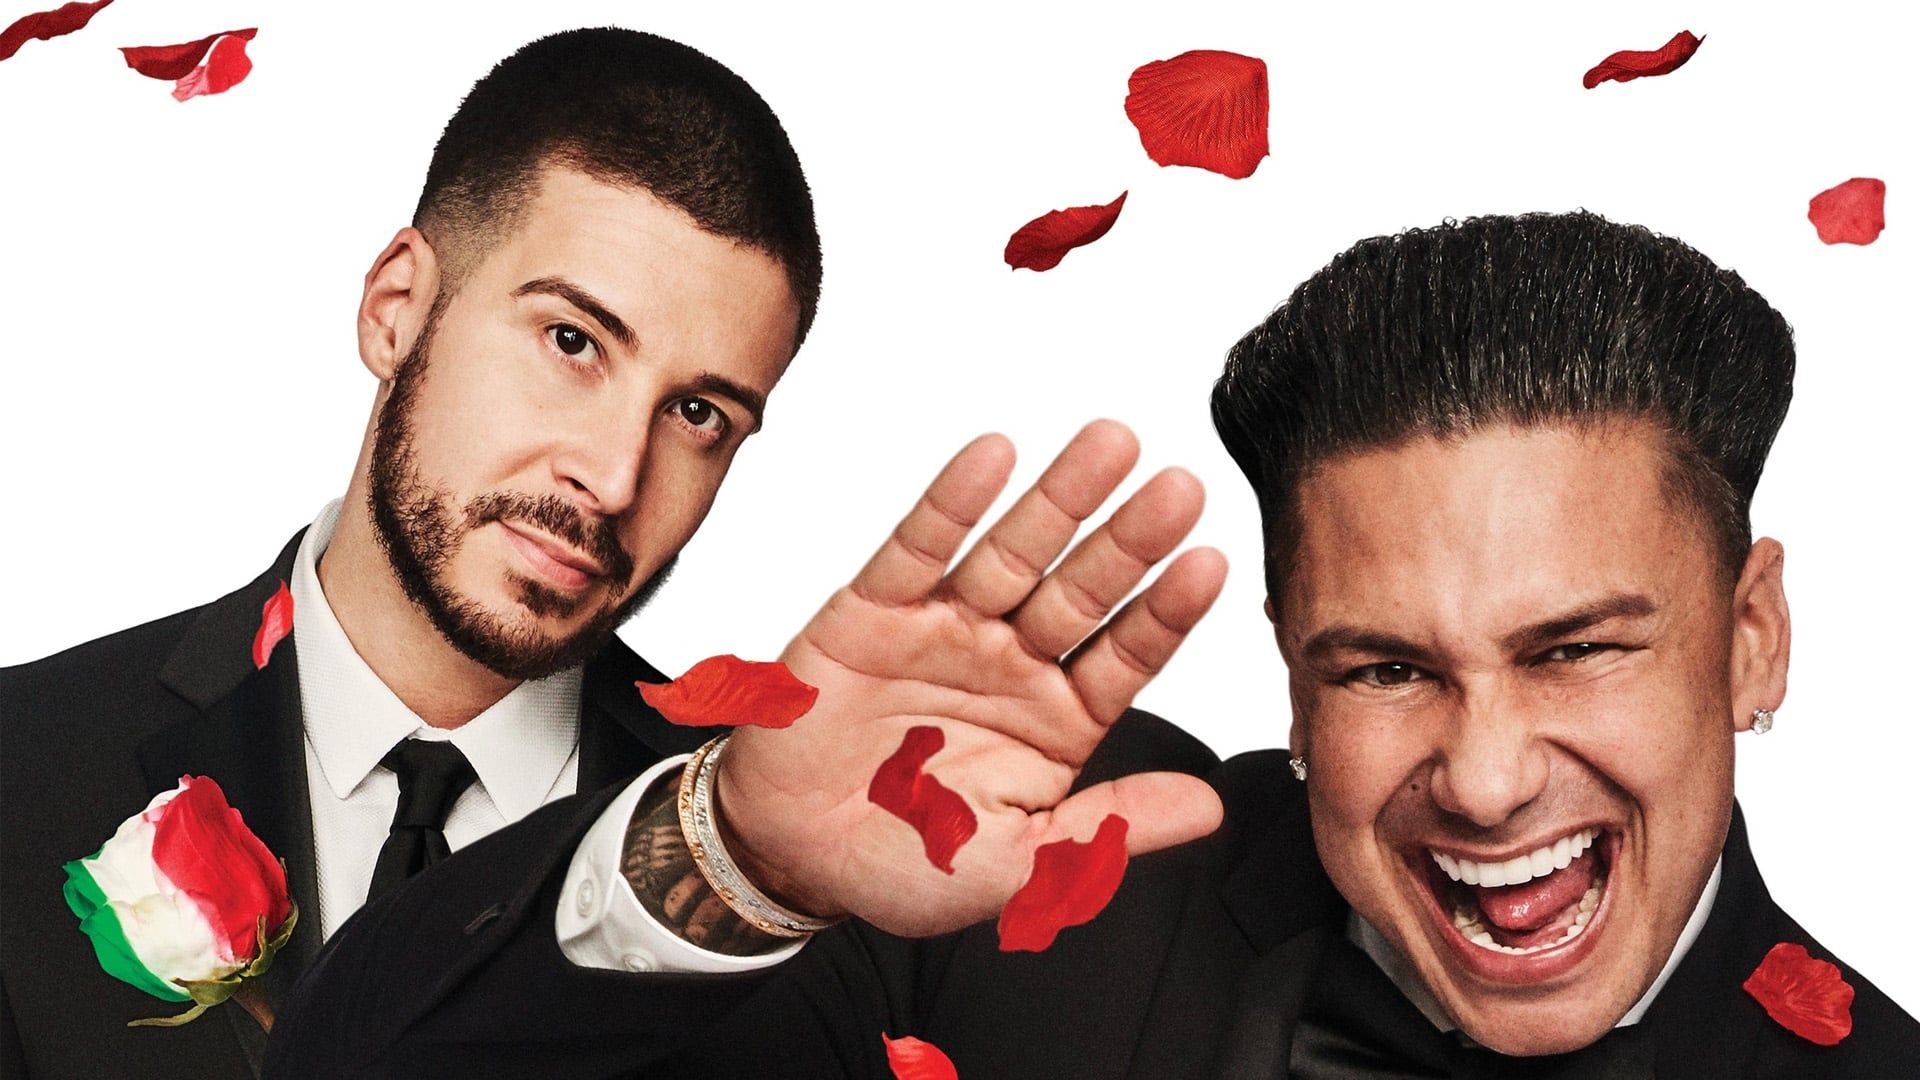 Double Shot at Love with DJ Pauly D & Vinny background